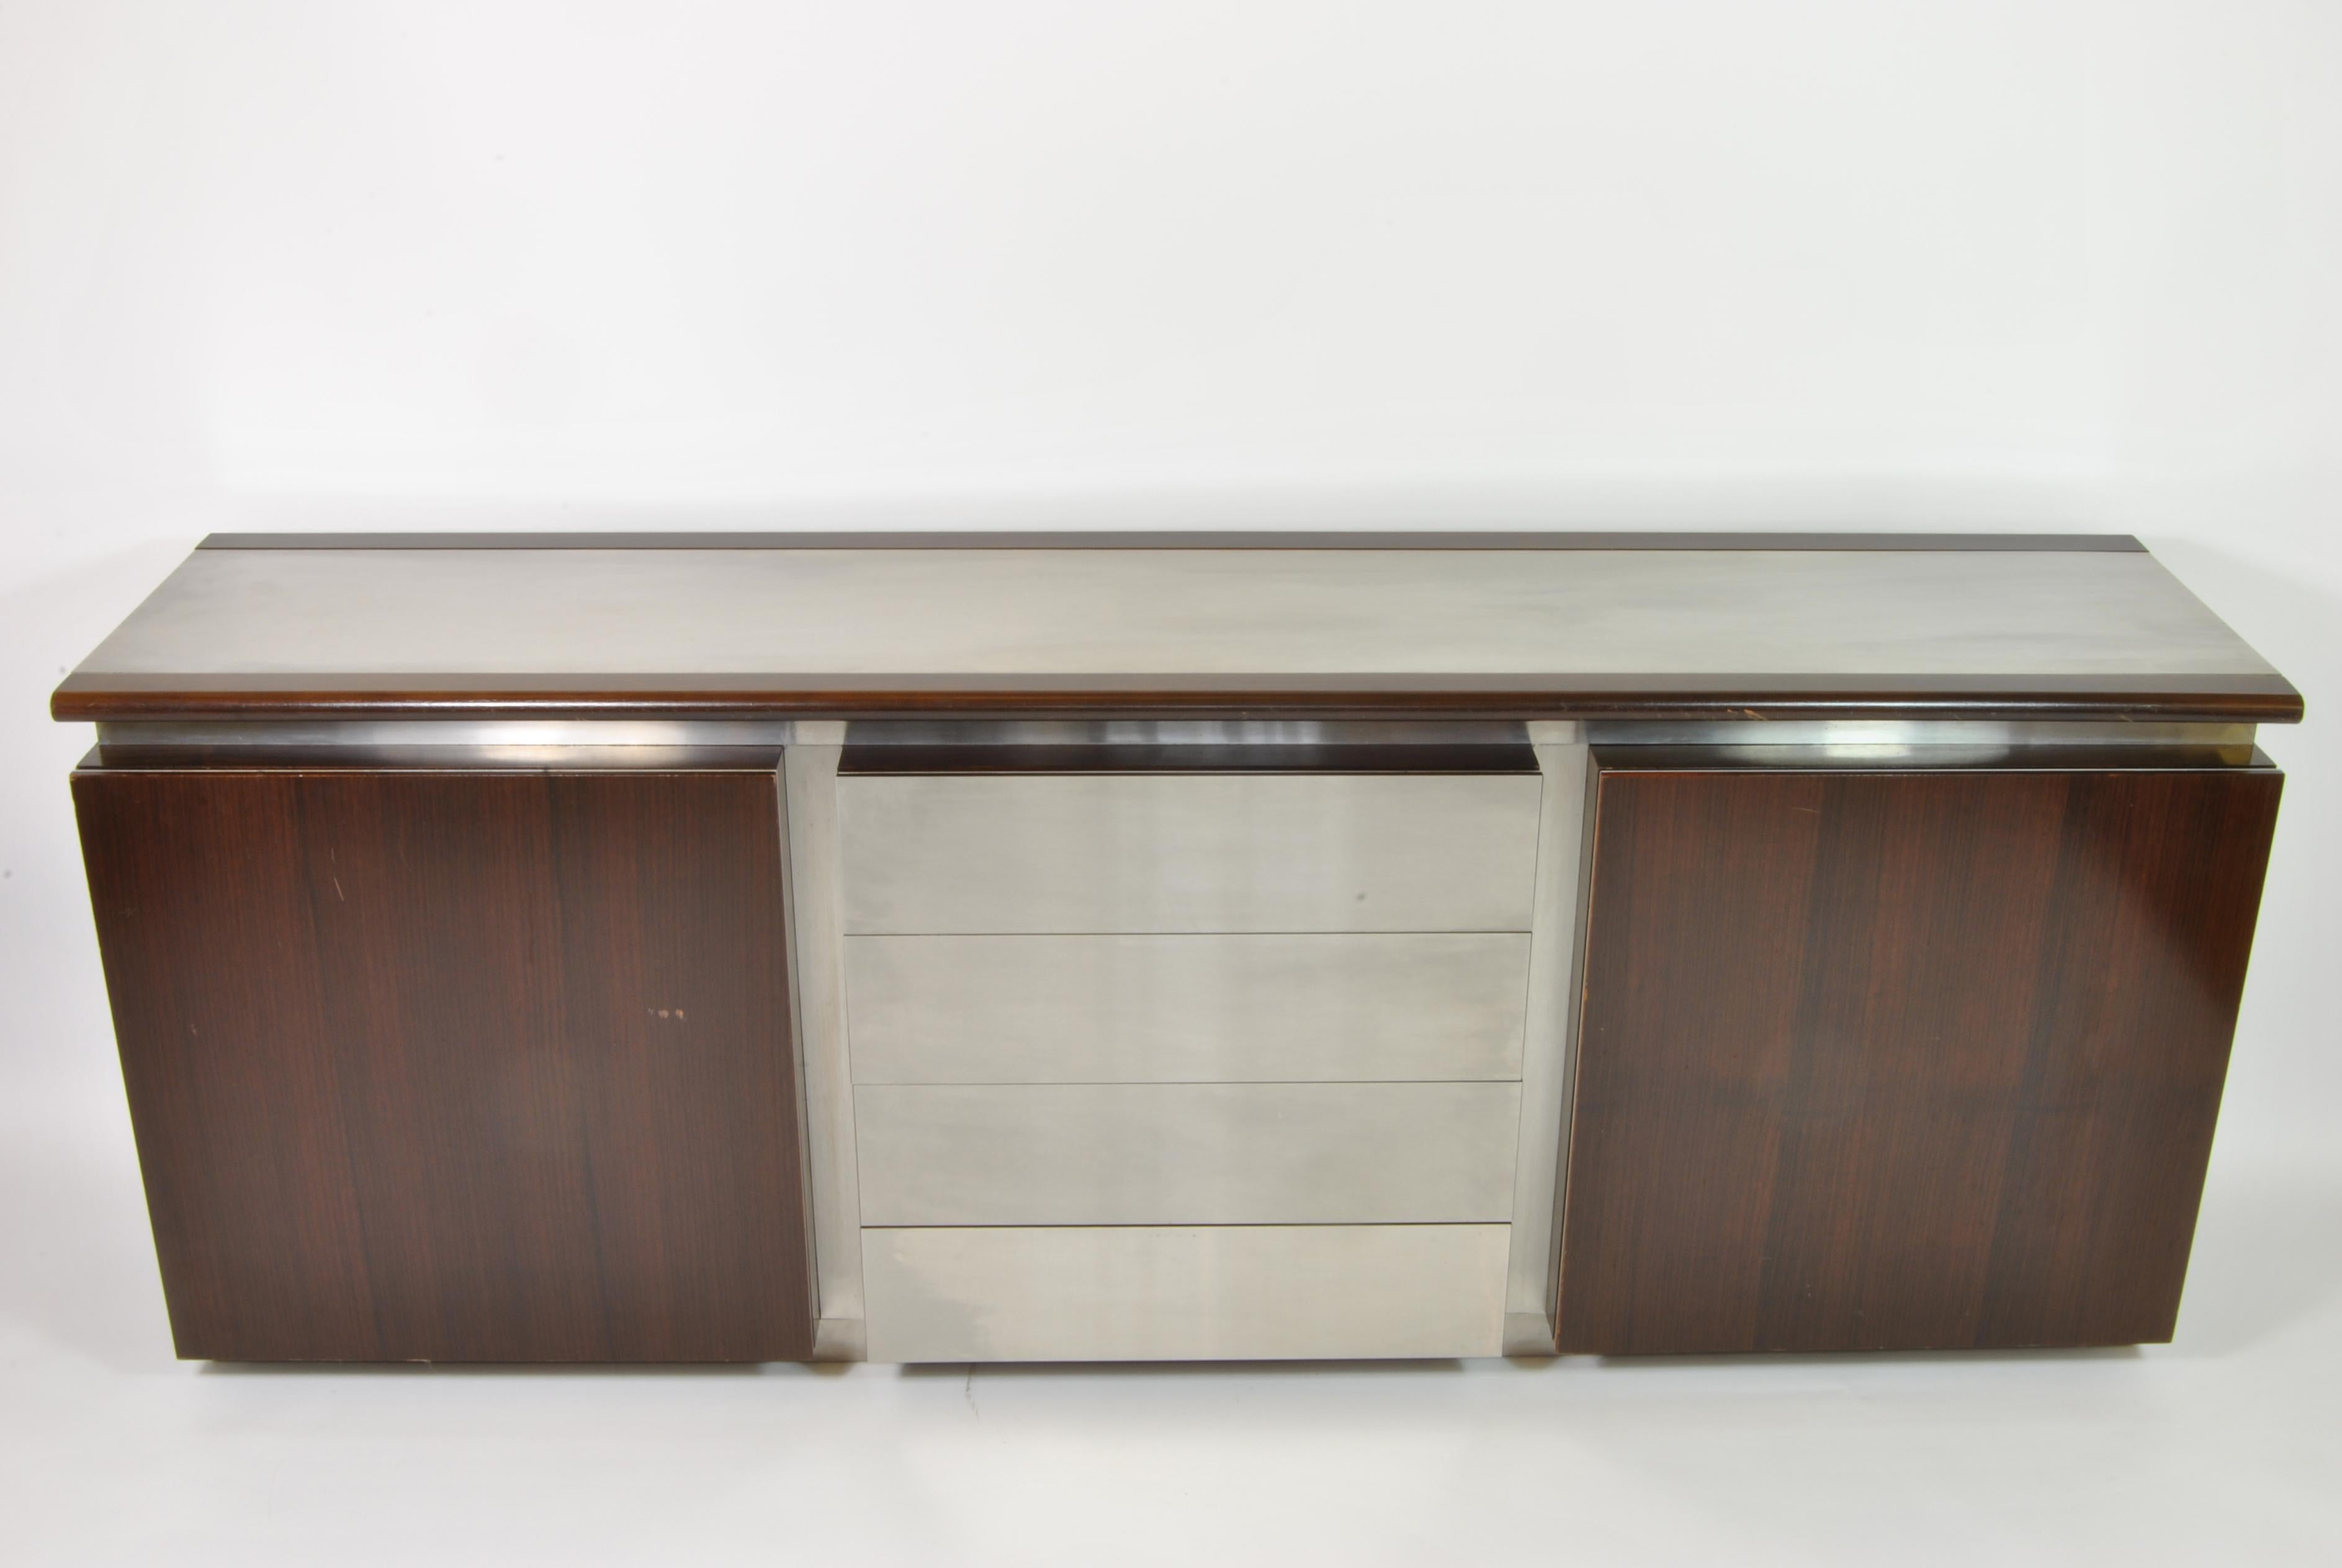 Buffet, design Ludovico Acerbis and Giotto Stoppino for Acerbis International, Italy, 1960.
Veneered wood, steel and glass shelves.